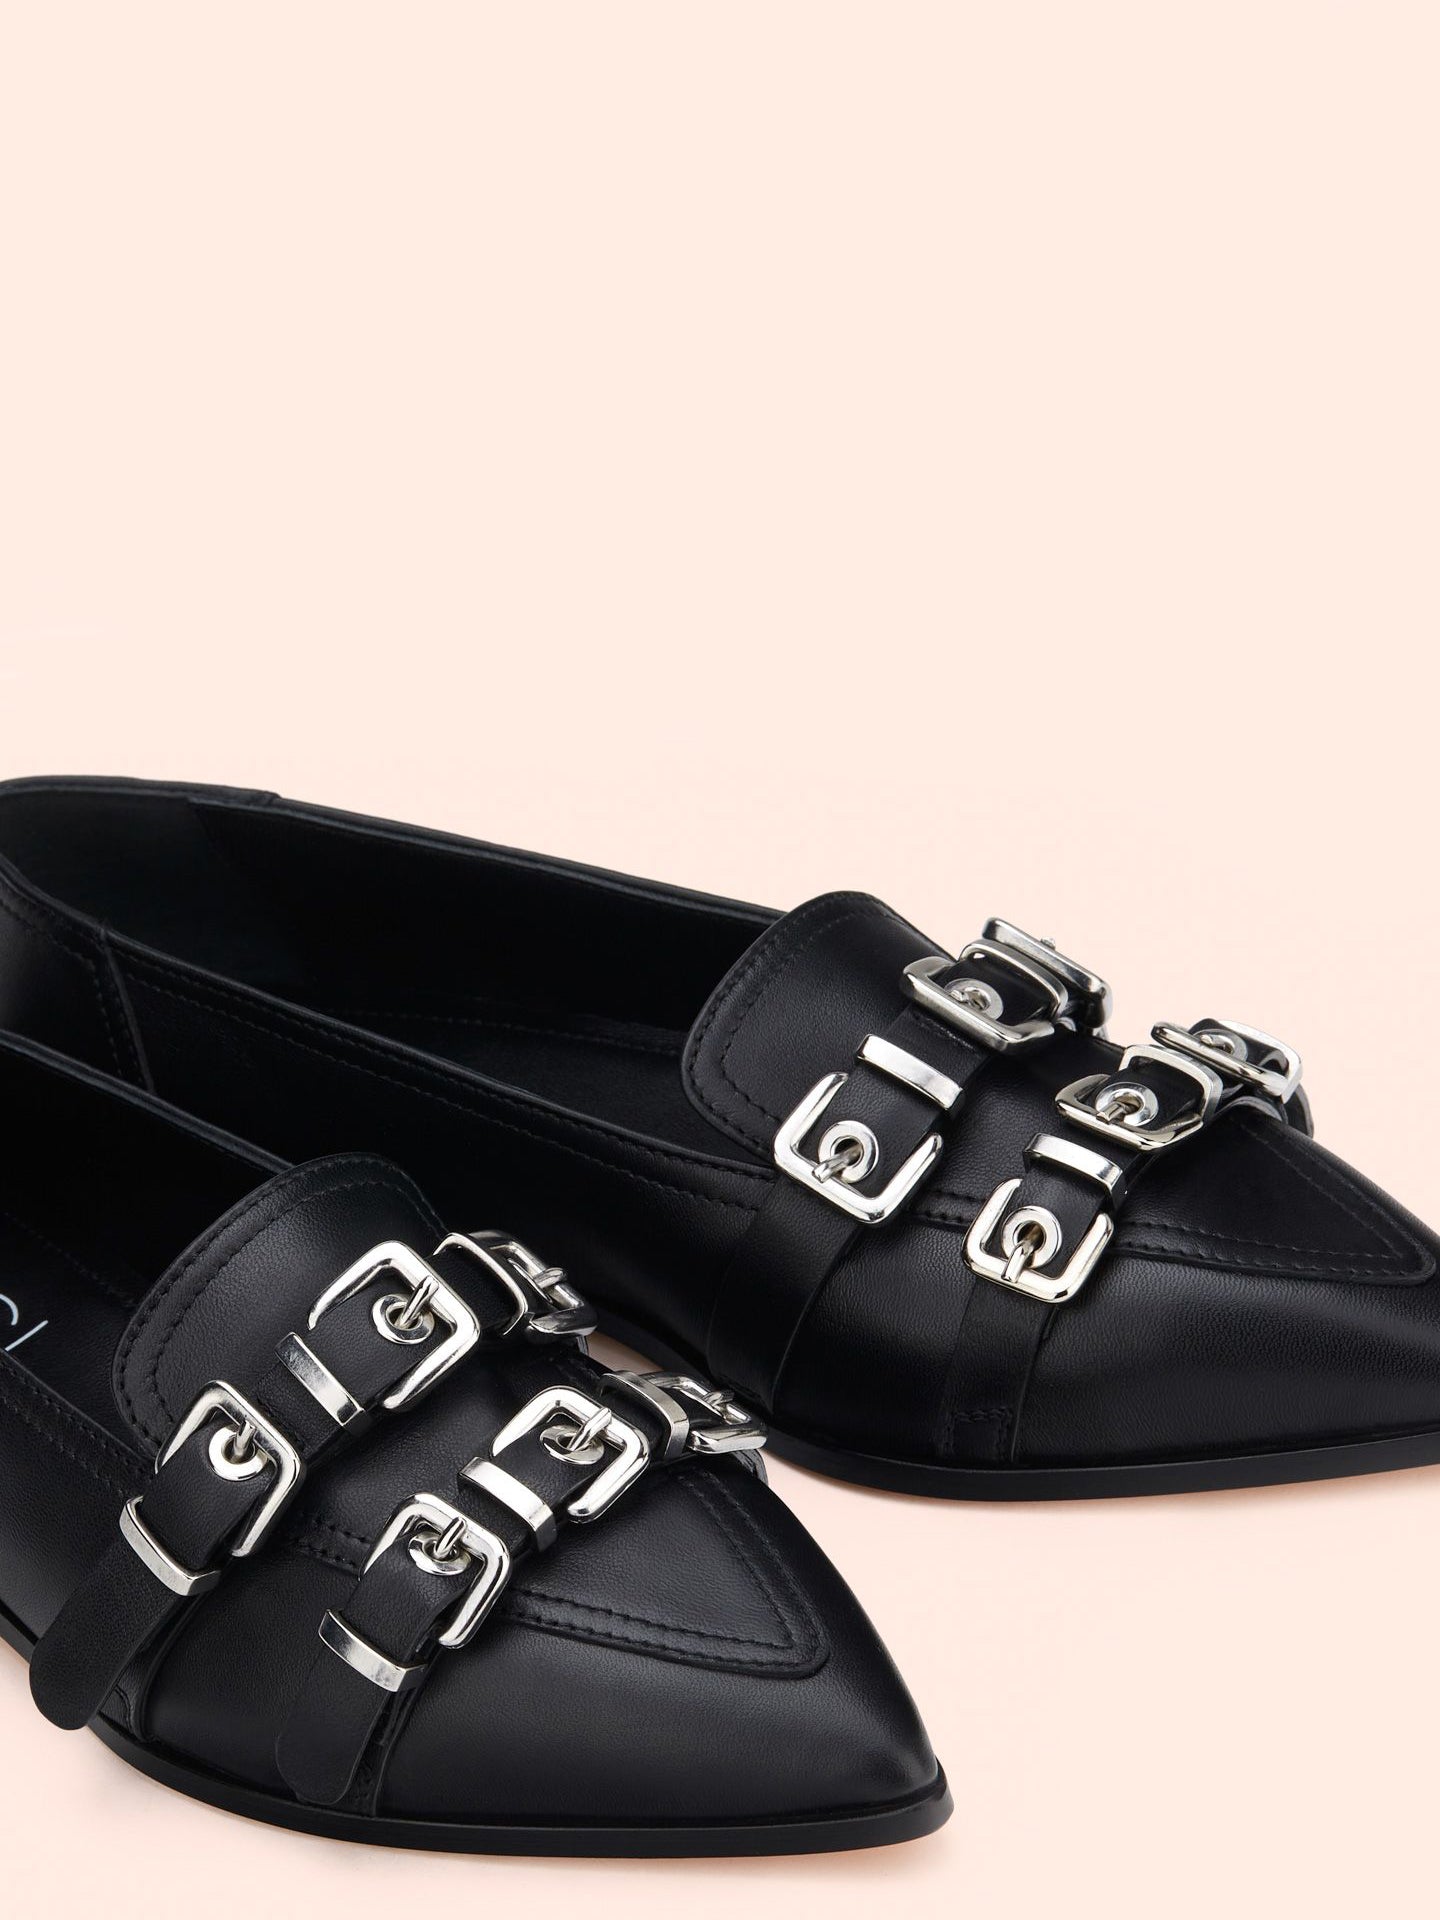 Ballet flats with buckles, black